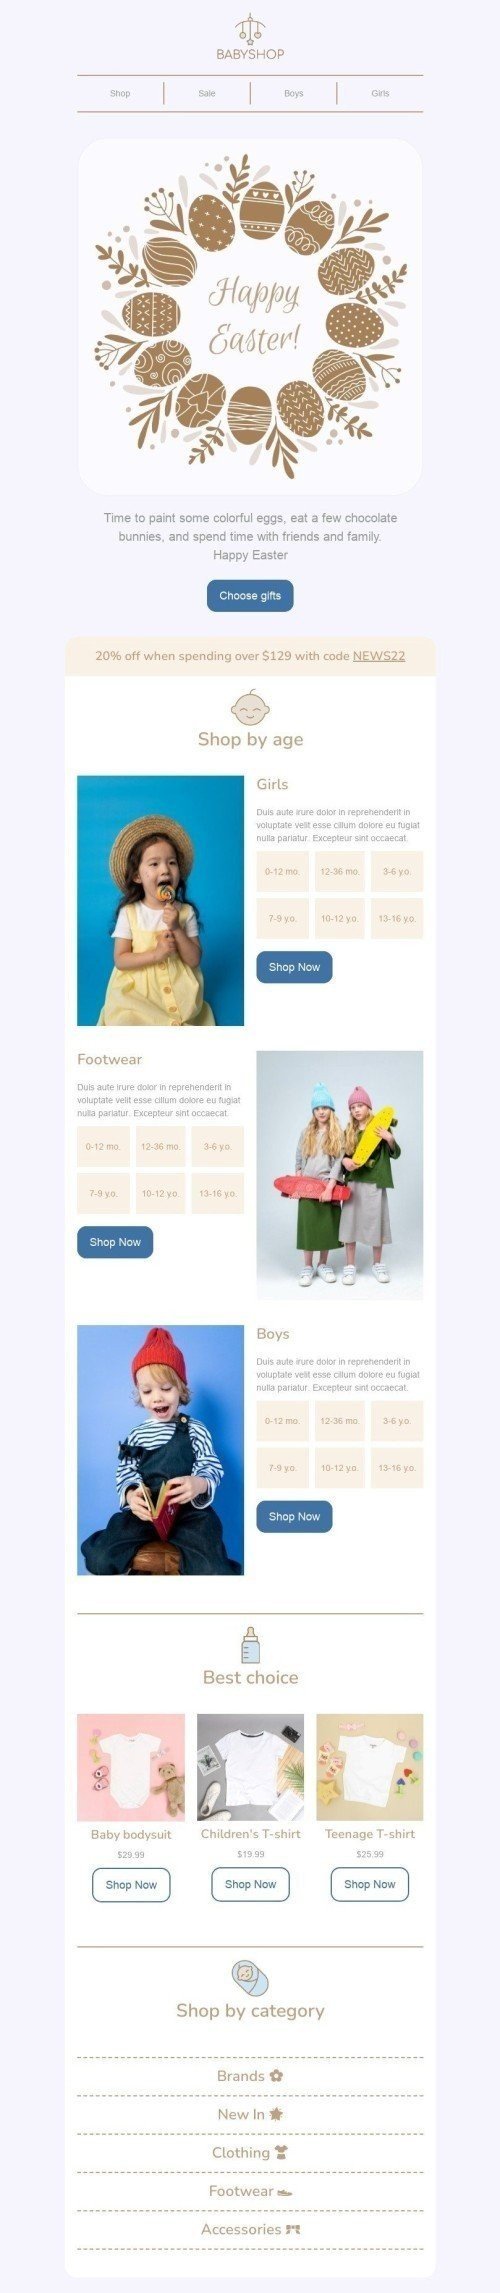 Easter Email Template "Time to paint colorful eggs" for Kids Goods industry desktop view